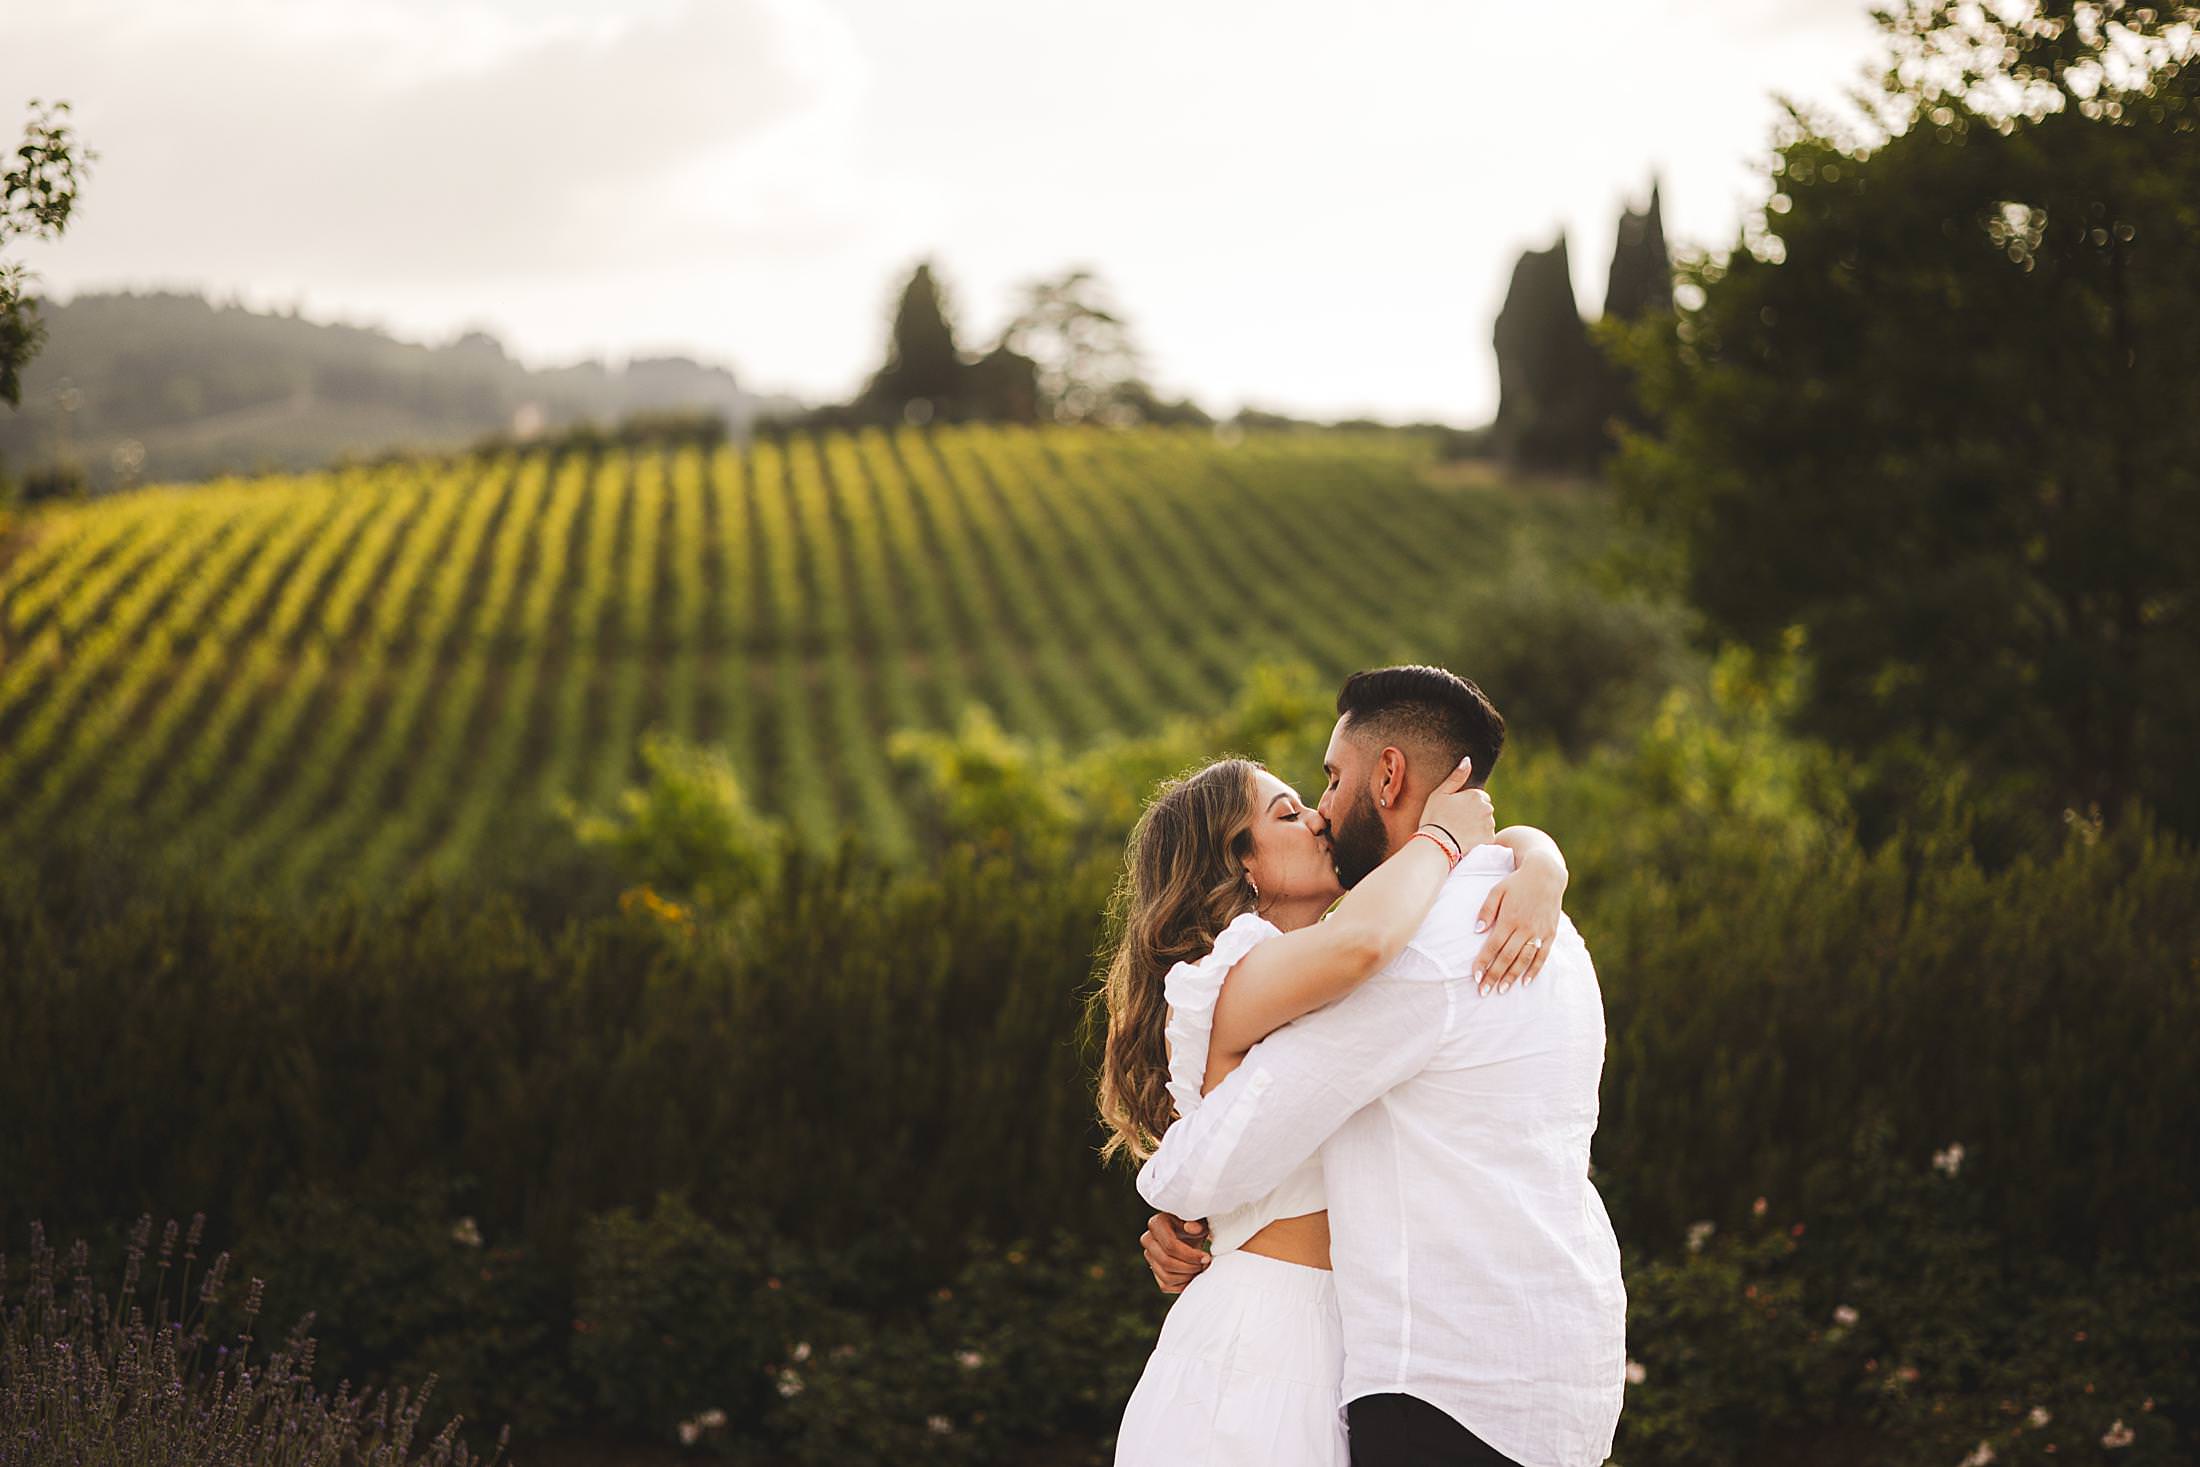 Unforgettable surprise proposal photo shoot with backdrop of vineyards and green rolling hills at Borgo del Cabreo